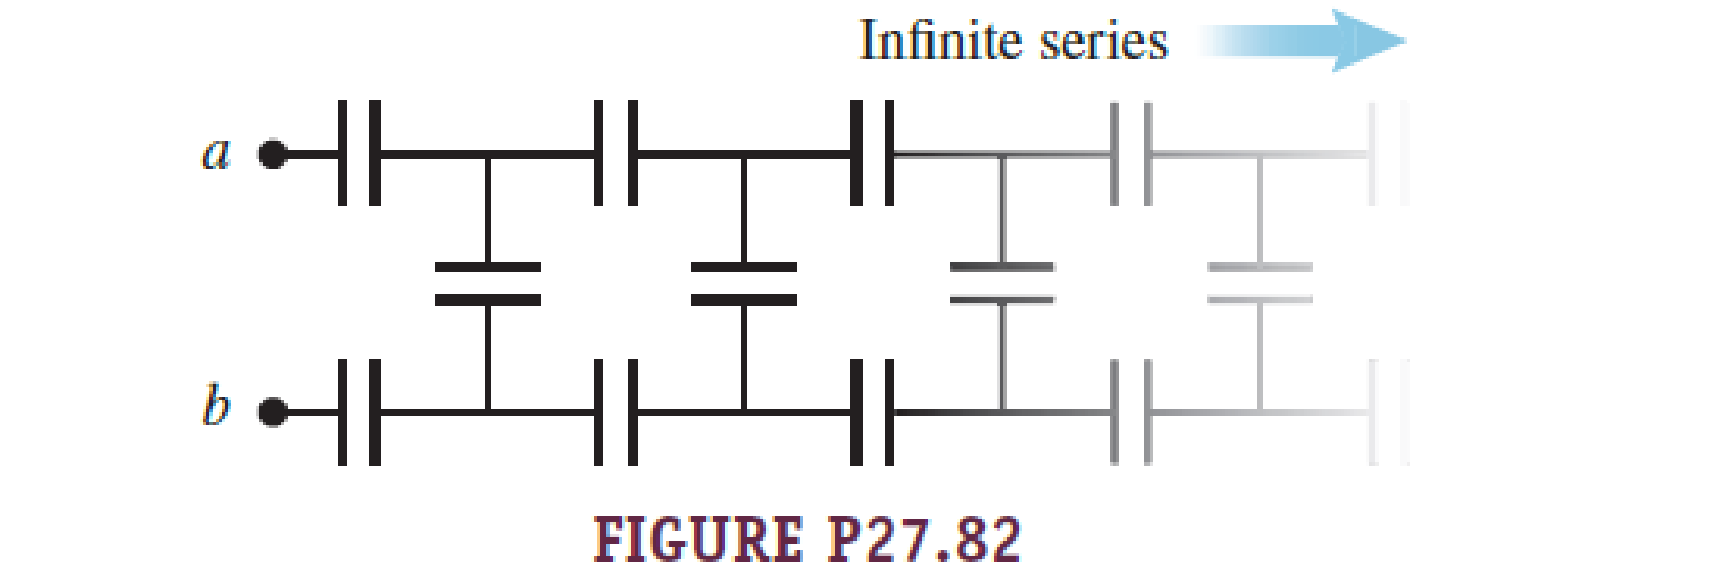 Chapter 27, Problem 82PQ, Consider an infinitely long network with identical capacitors arranged as shown in Figure P27.82. 